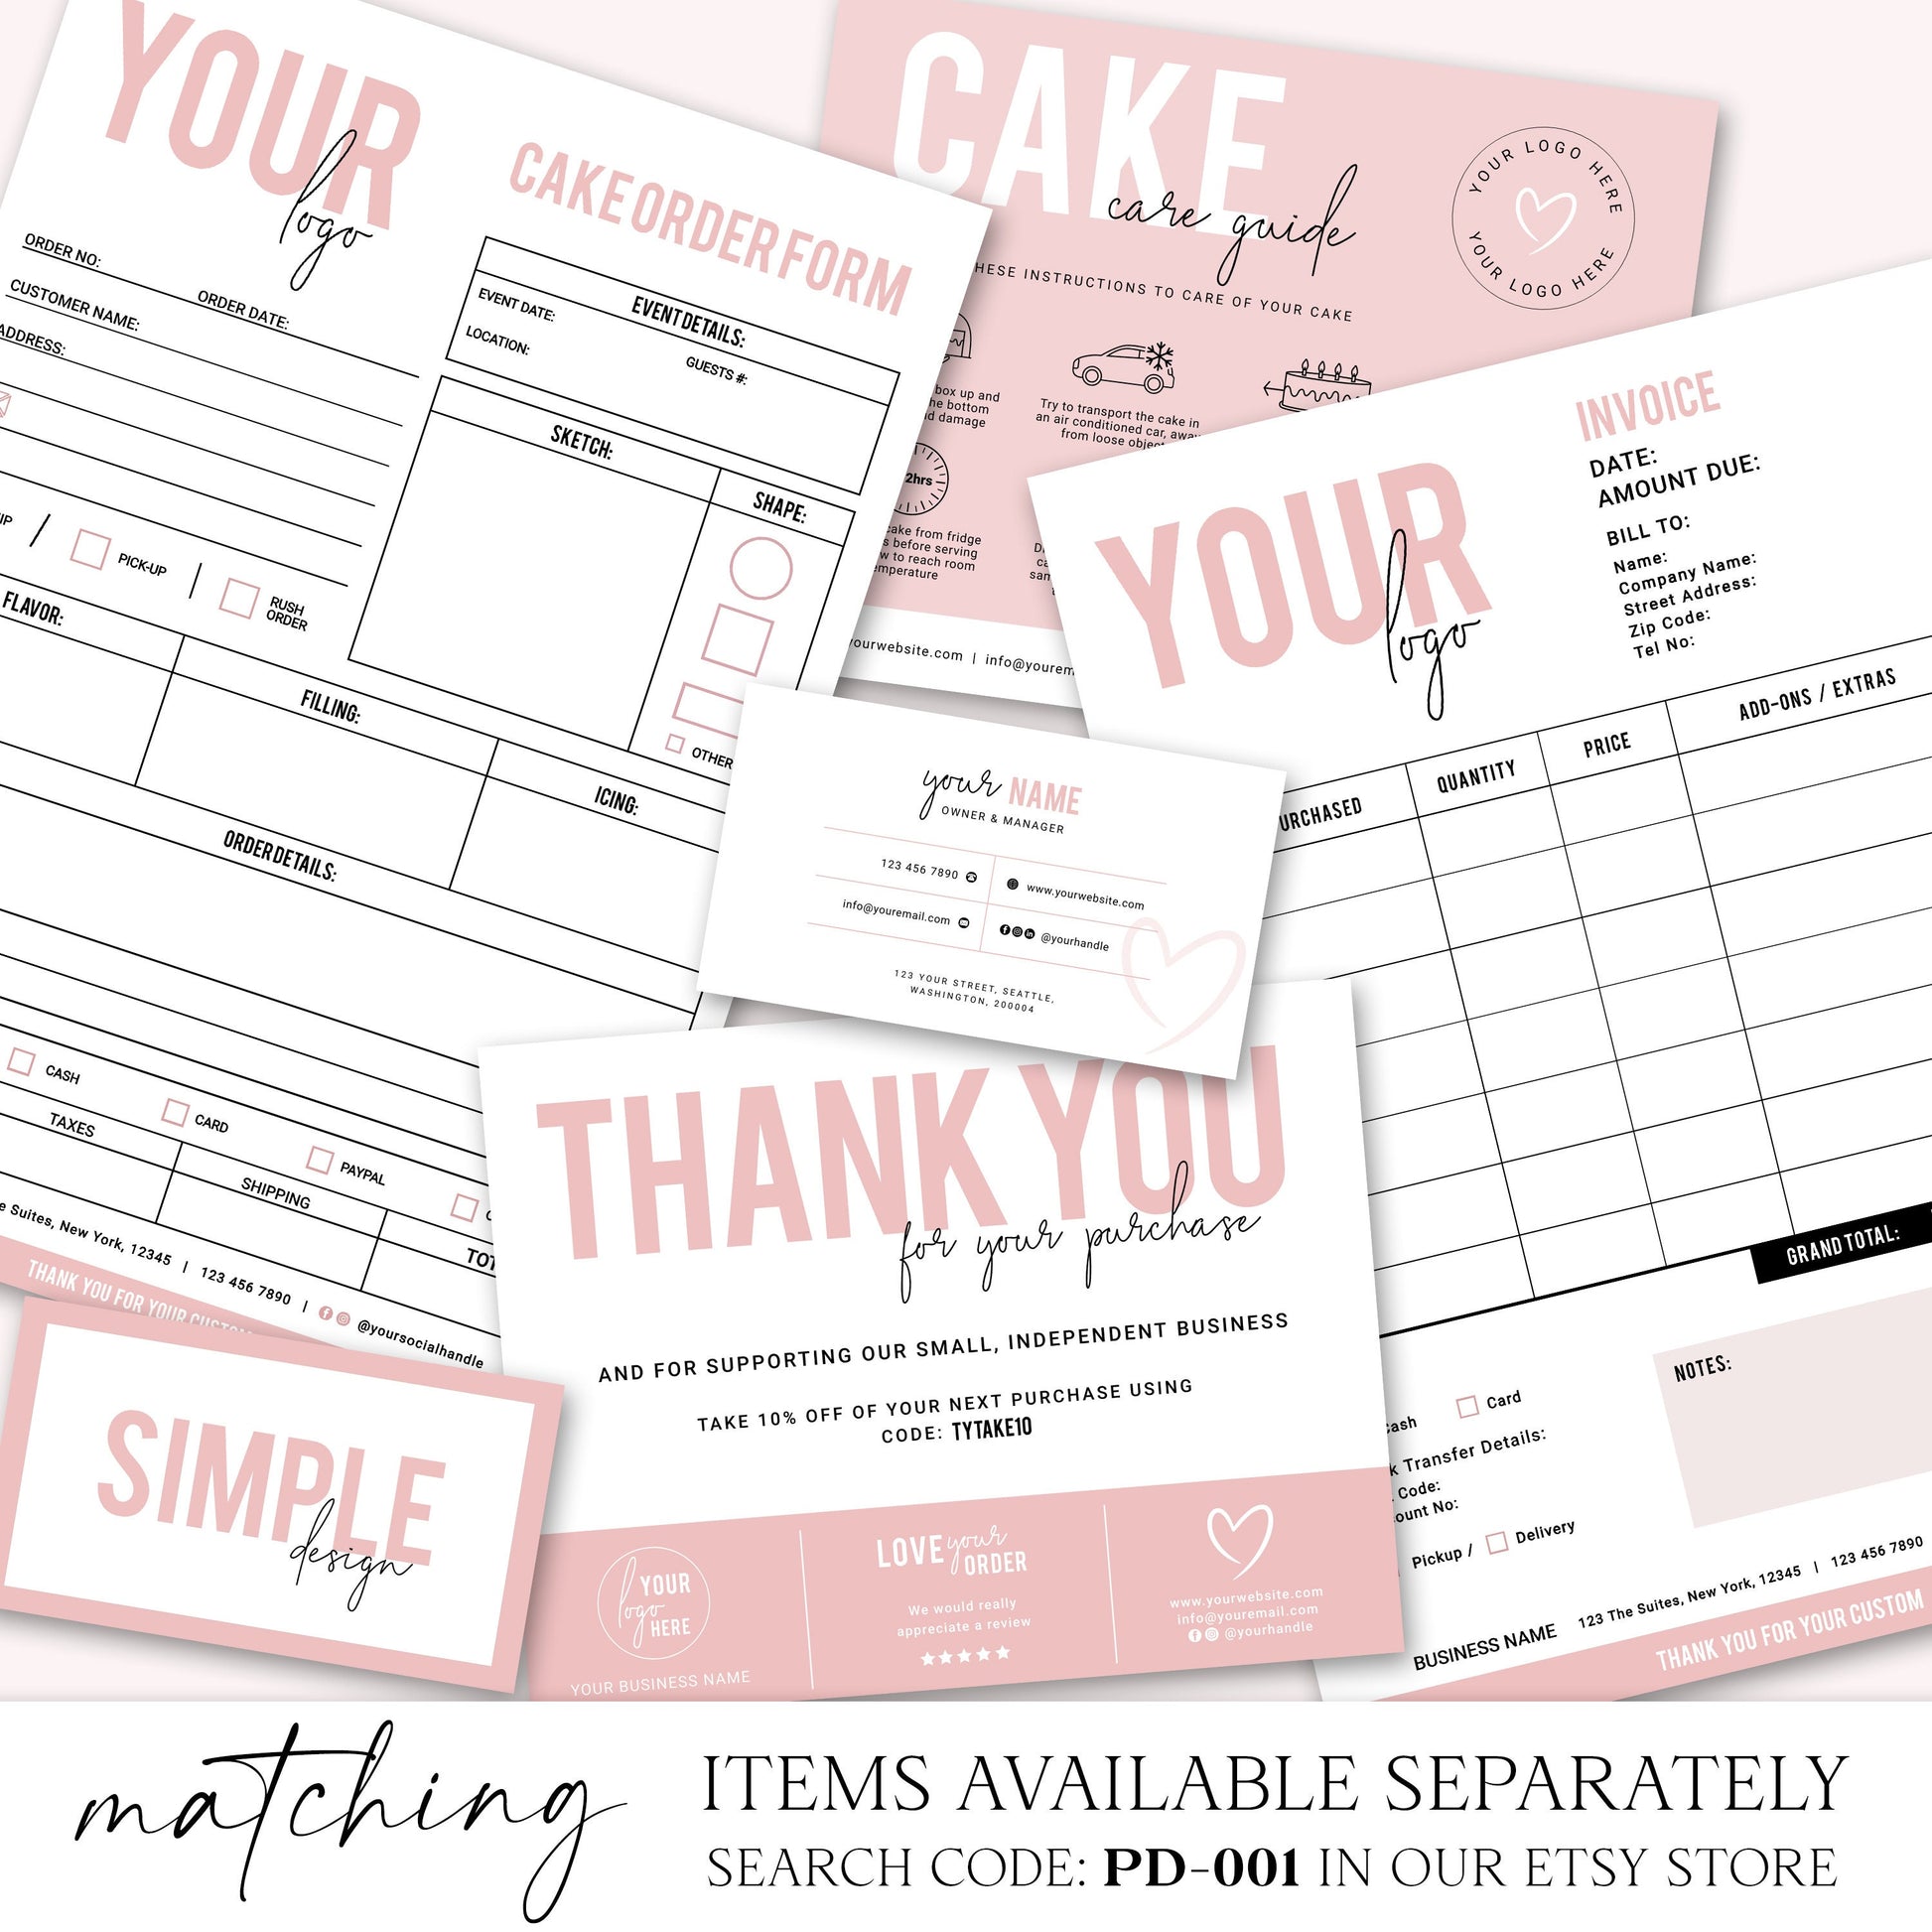 Jewelry Care Editable Template, DIY Minimalist Jewellery Care Guide Card, Simple Customizable Printable Jewelry Instructions Insert PD-001